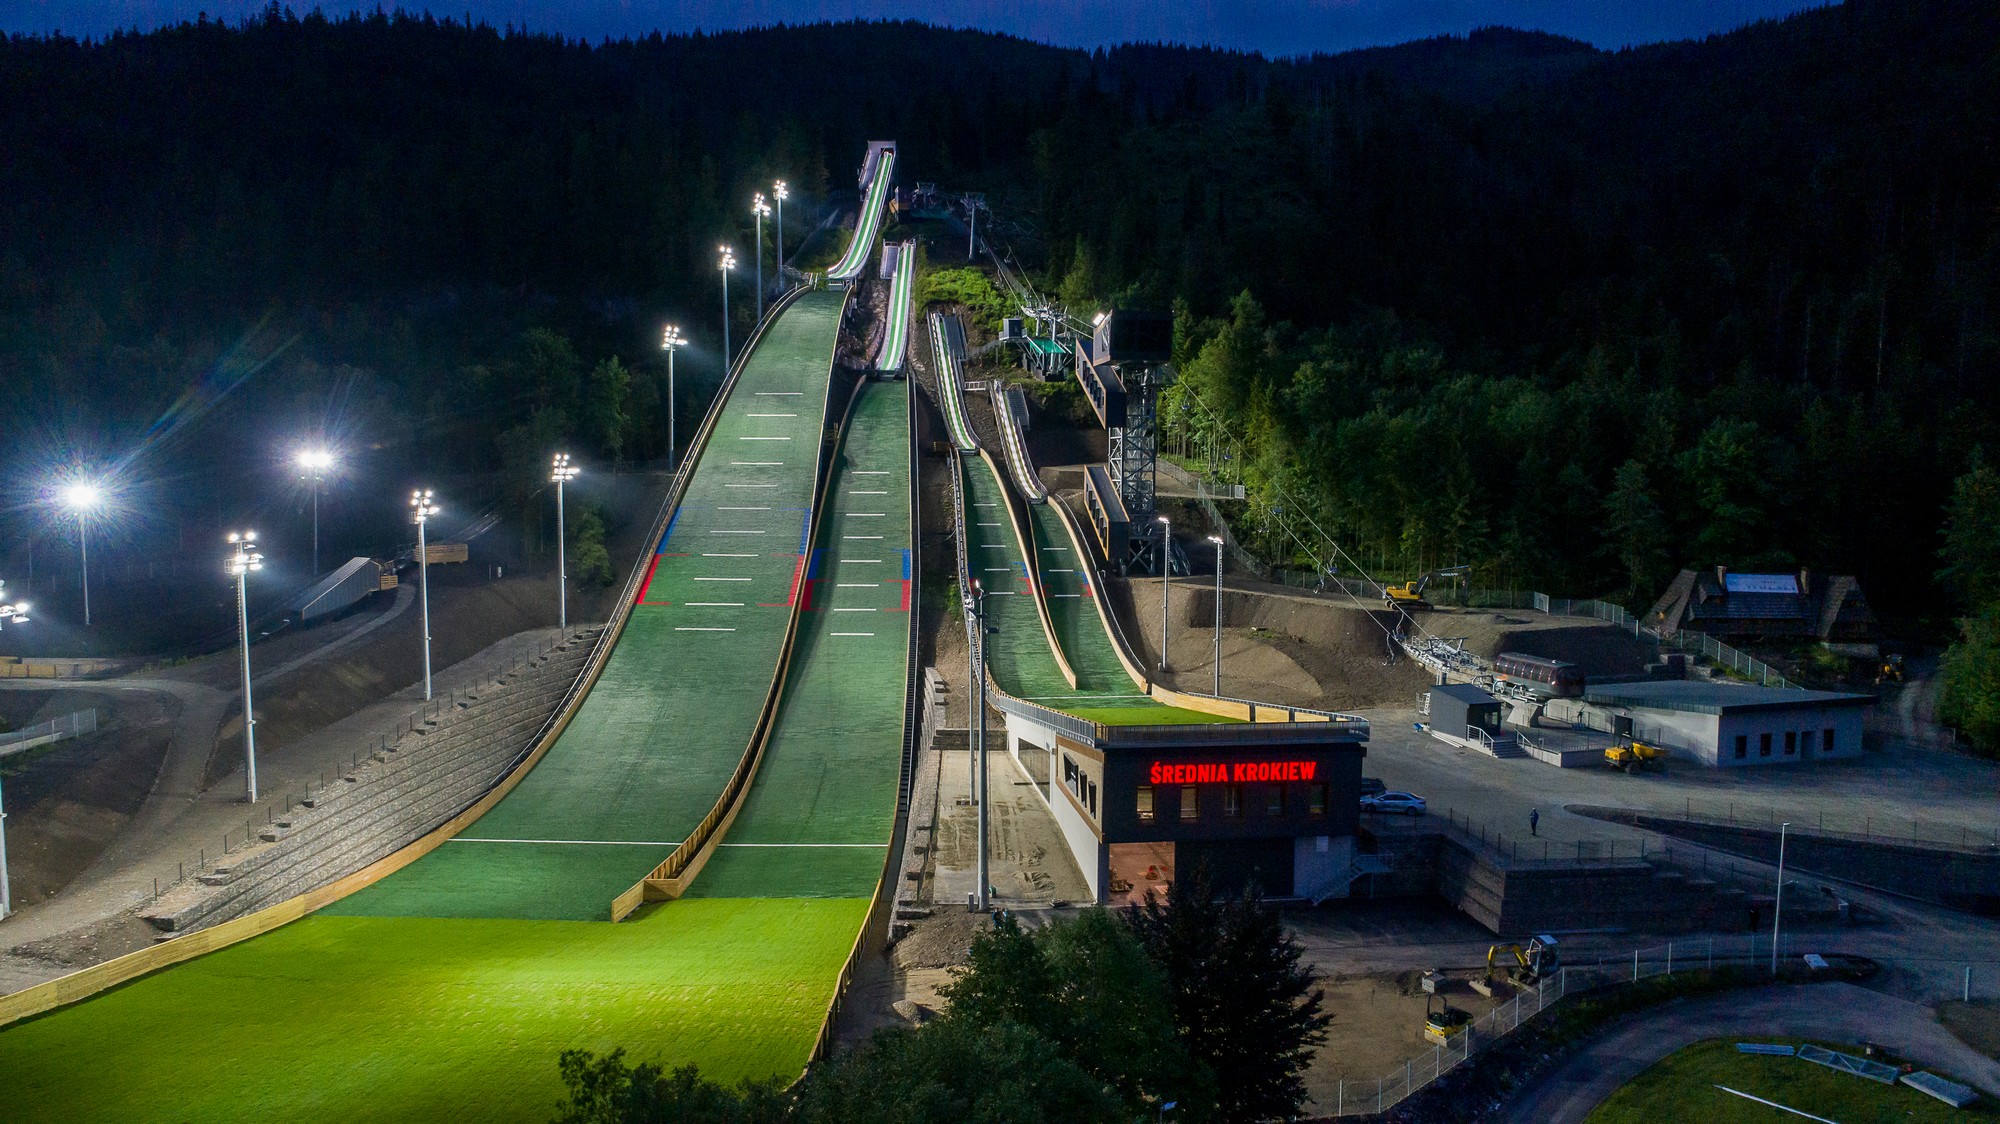 The Srednia Krokiew is (almost) ready for the European Games